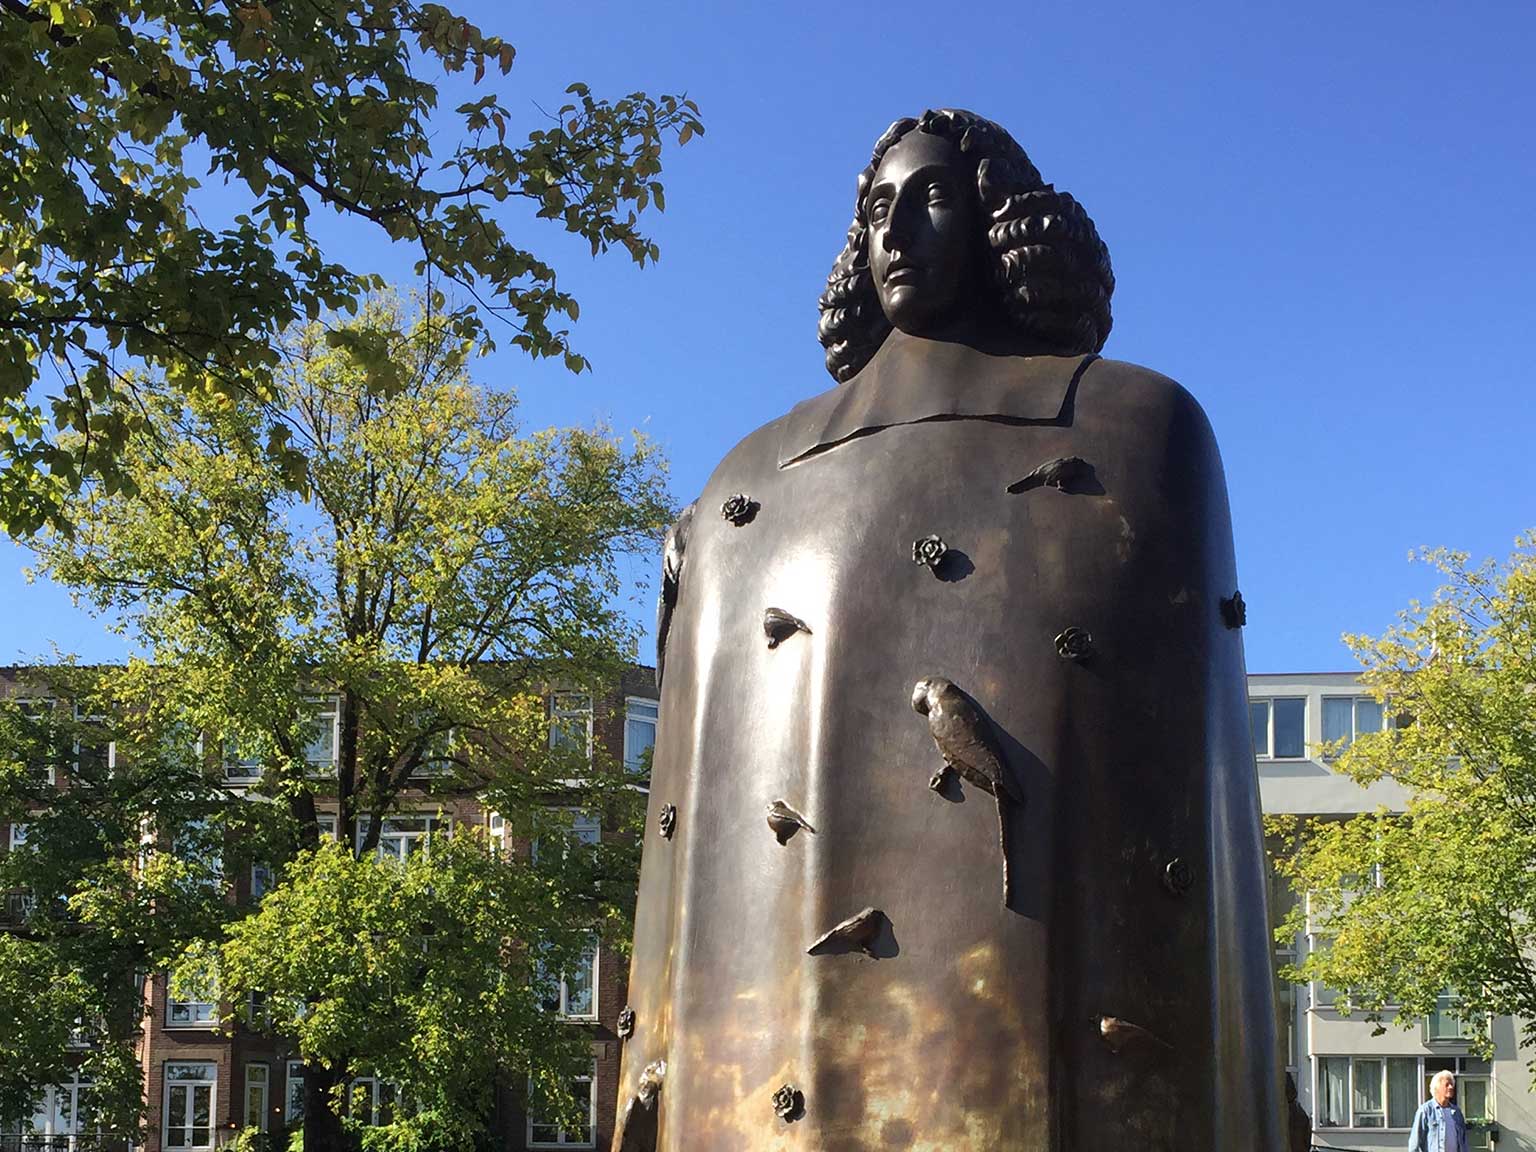 Statue of Spinoza at the Zwanenburgwal, Amsterdam, by sculptor Nicolas Dings